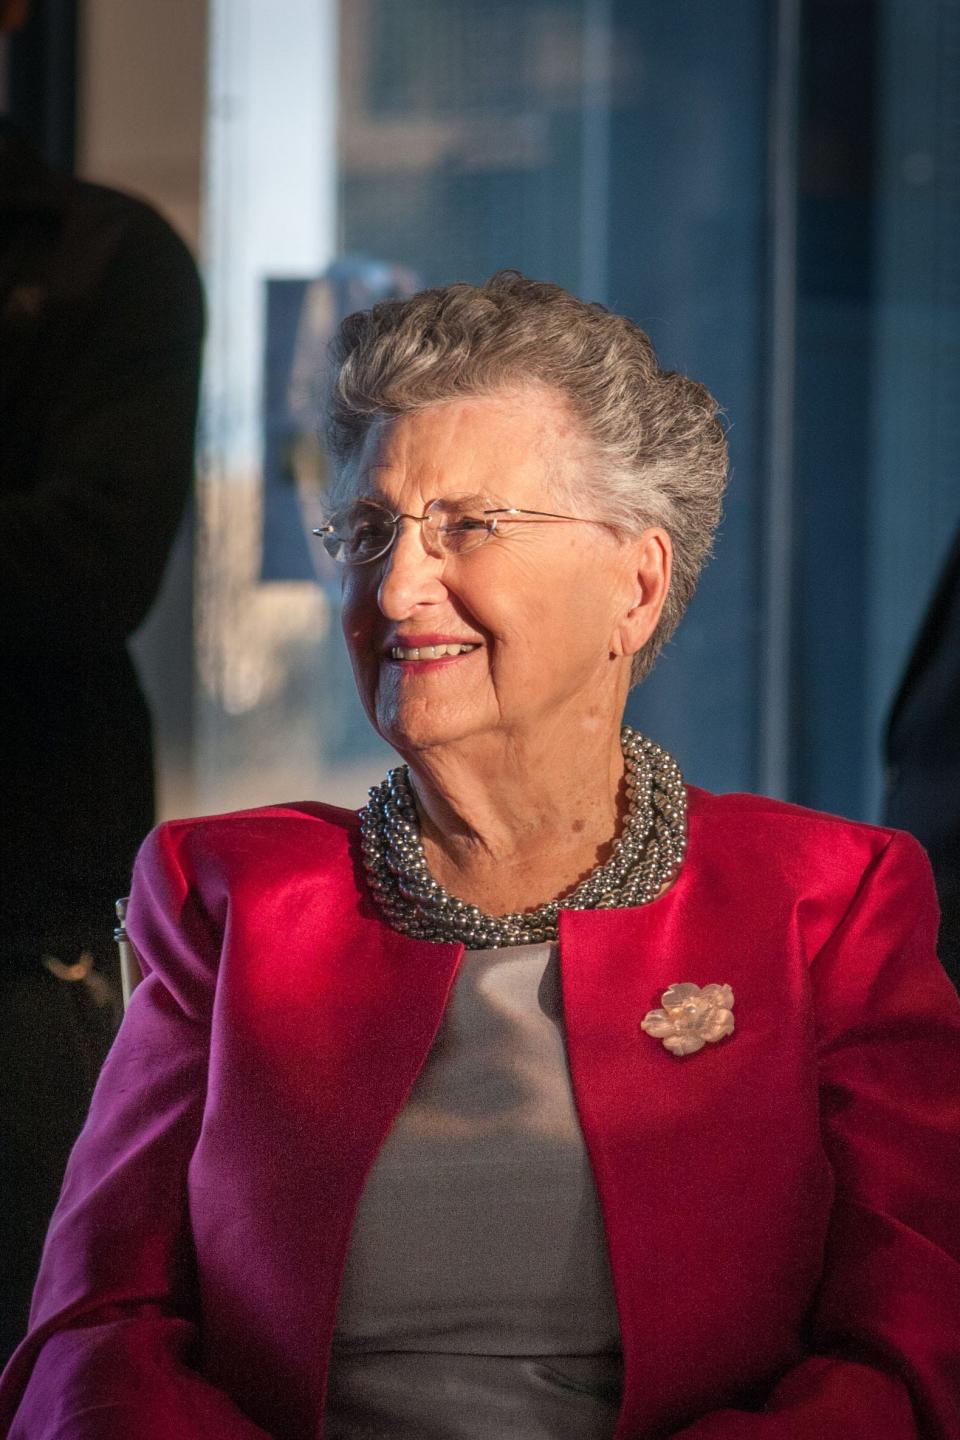 Claire T. Carney, seen here at the 2006 dedication of the Claire T. Carney Library, is mourned by the UMass Dartmouth community after her death on Sunday, March 24, at age 101. She was the university's first female trustee, when it was known as SMU.